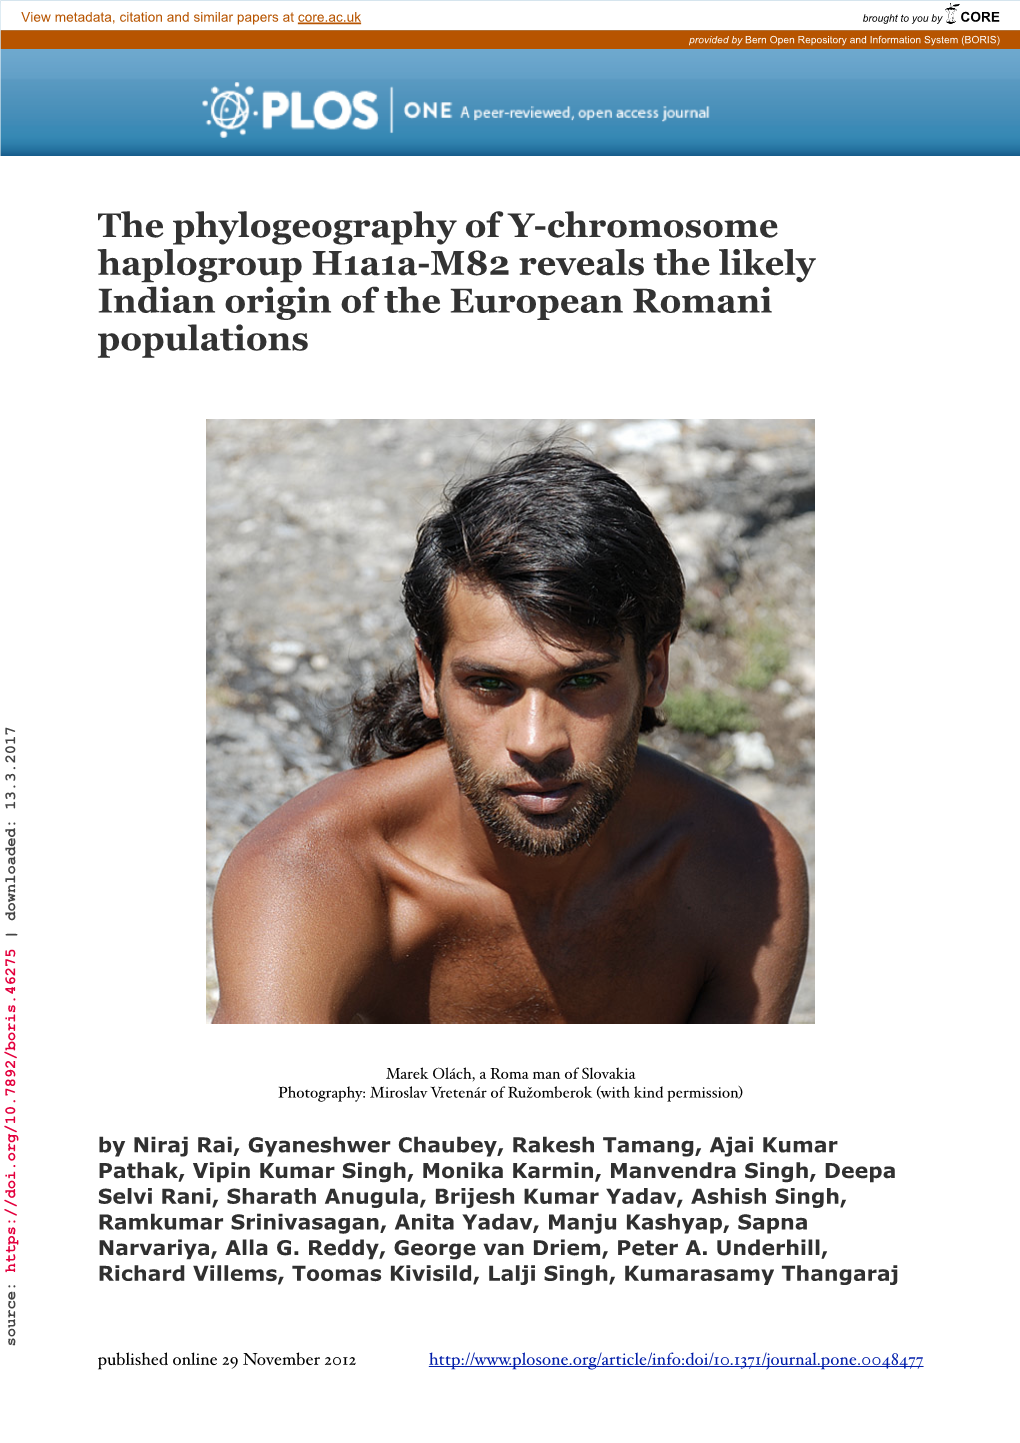 The Phylogeography of Y-Chromosome Haplogroup H1a1a-M82 Reveals the Likely Indian Origin of the European Romani Populations | Downloaded: 13.3.2017